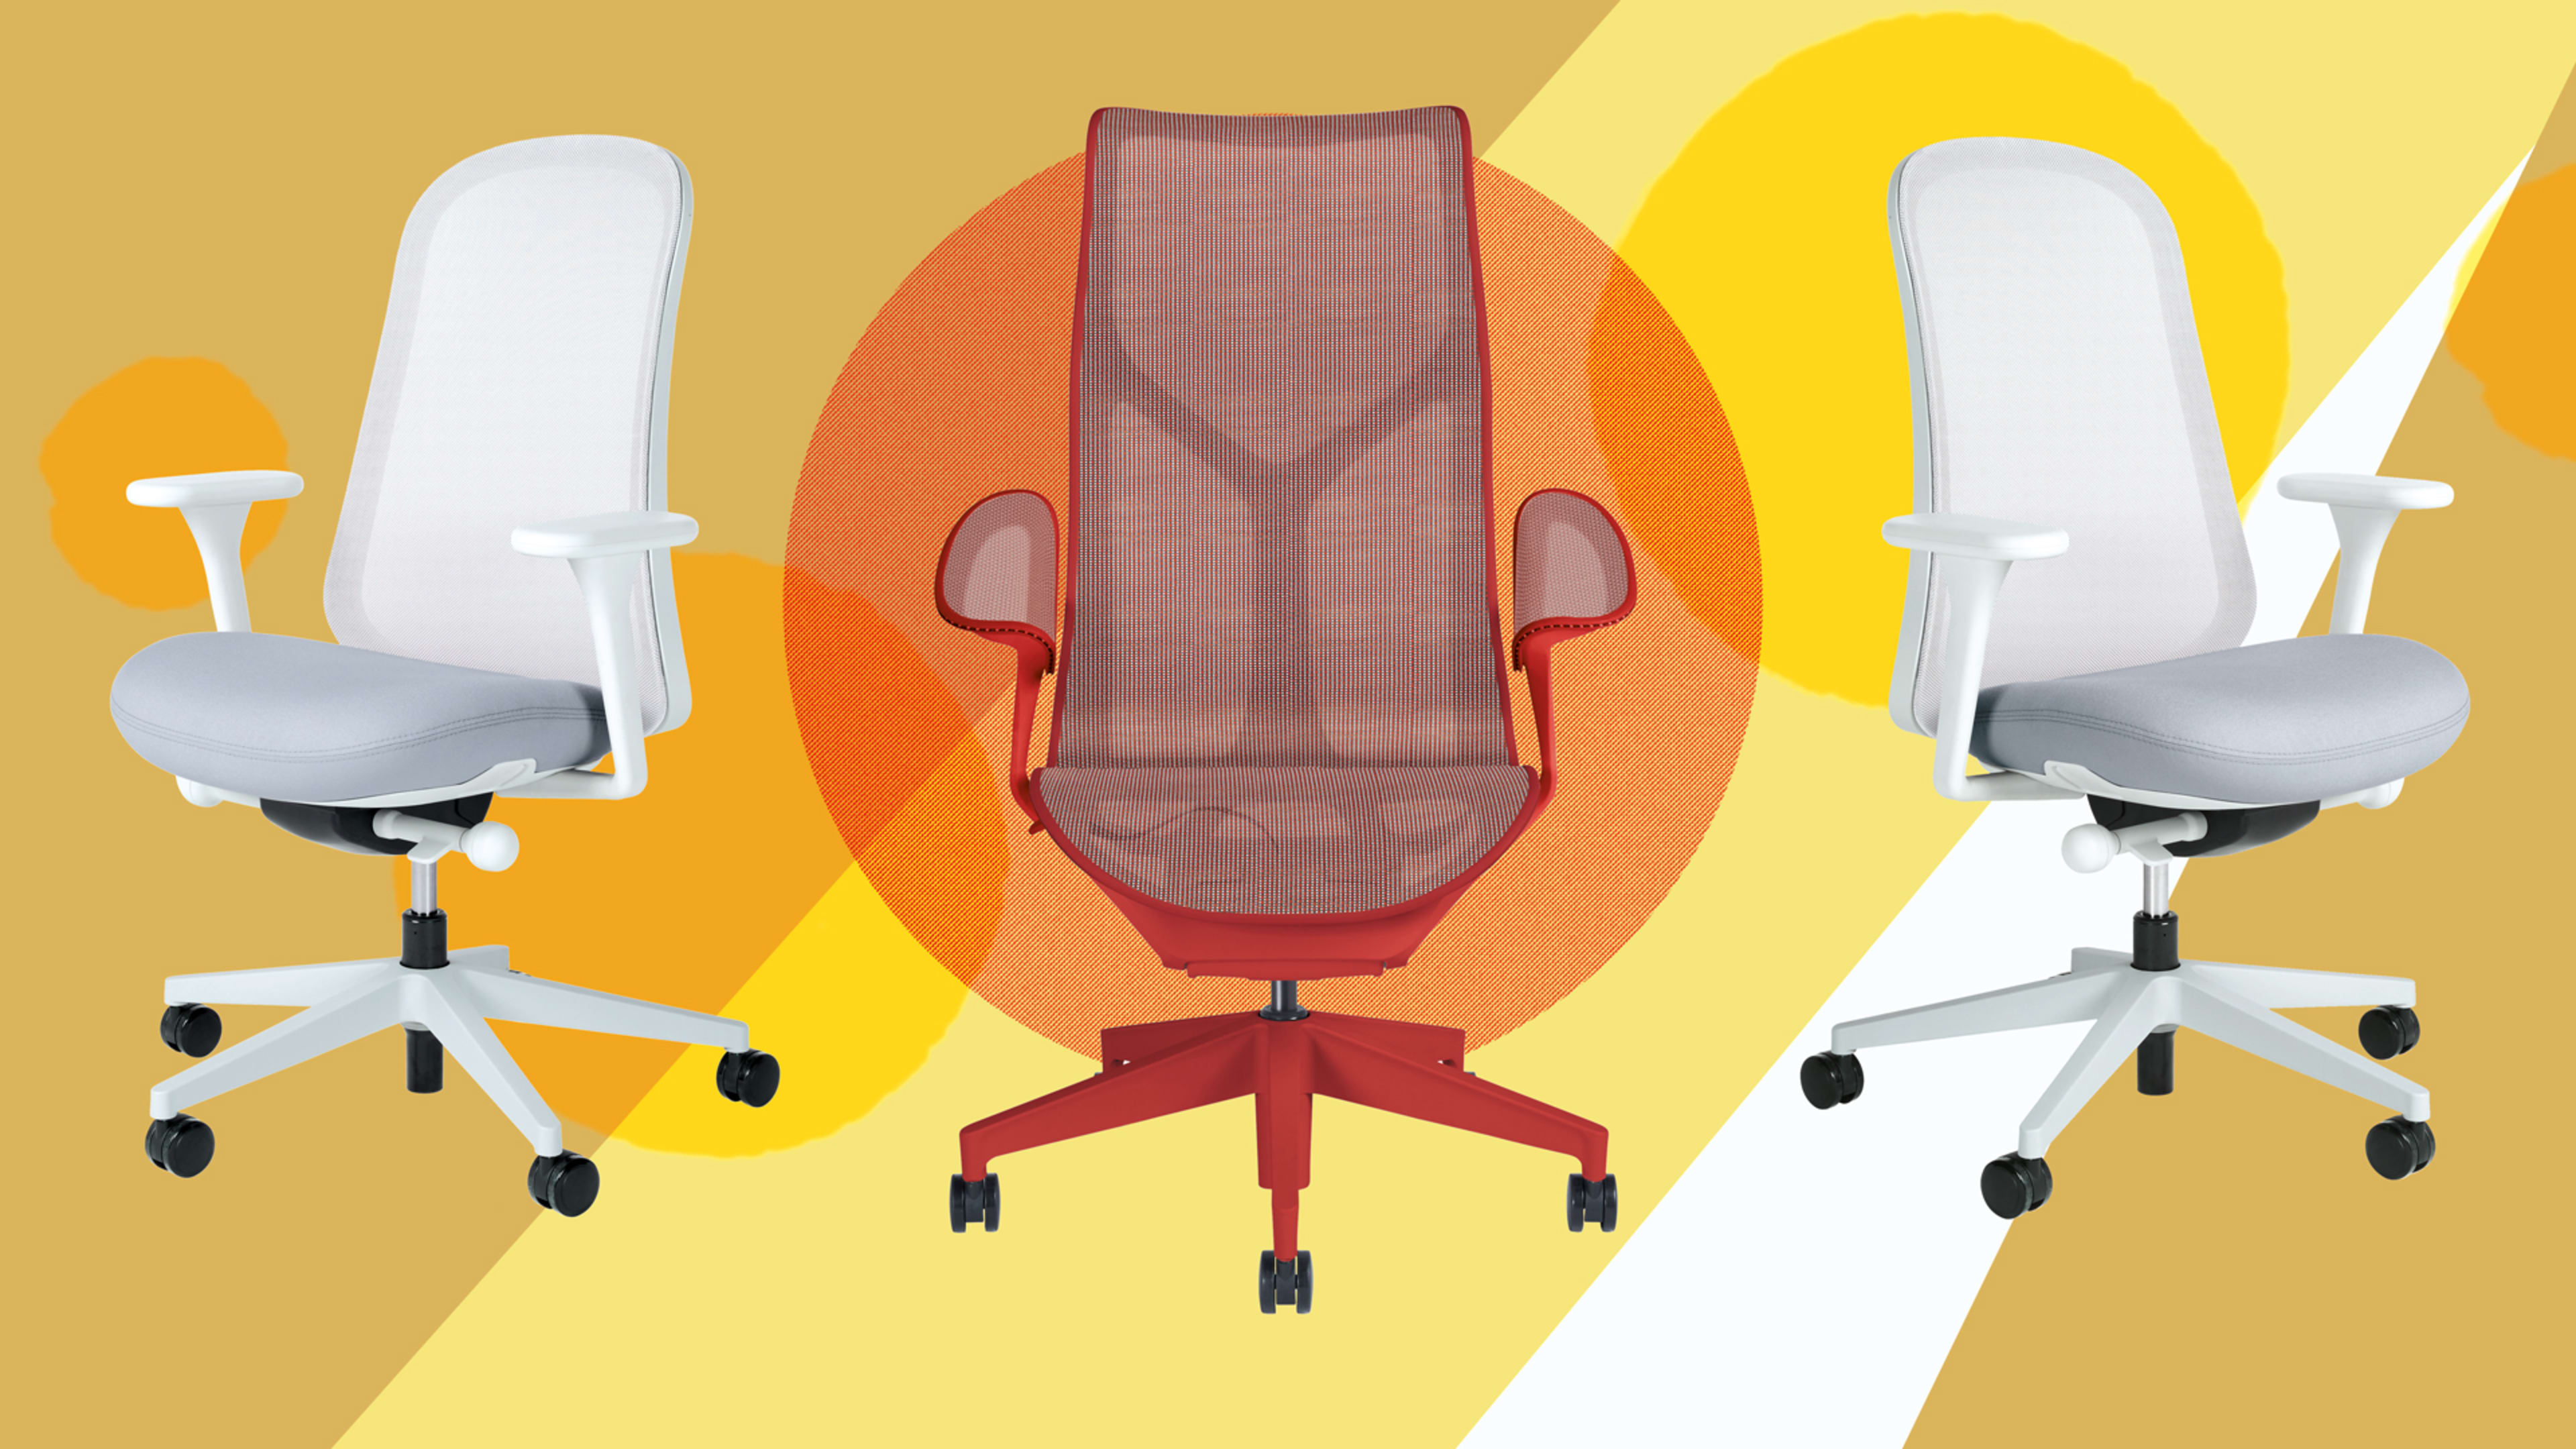 These stylish Herman Miller chairs are perfect for your home office